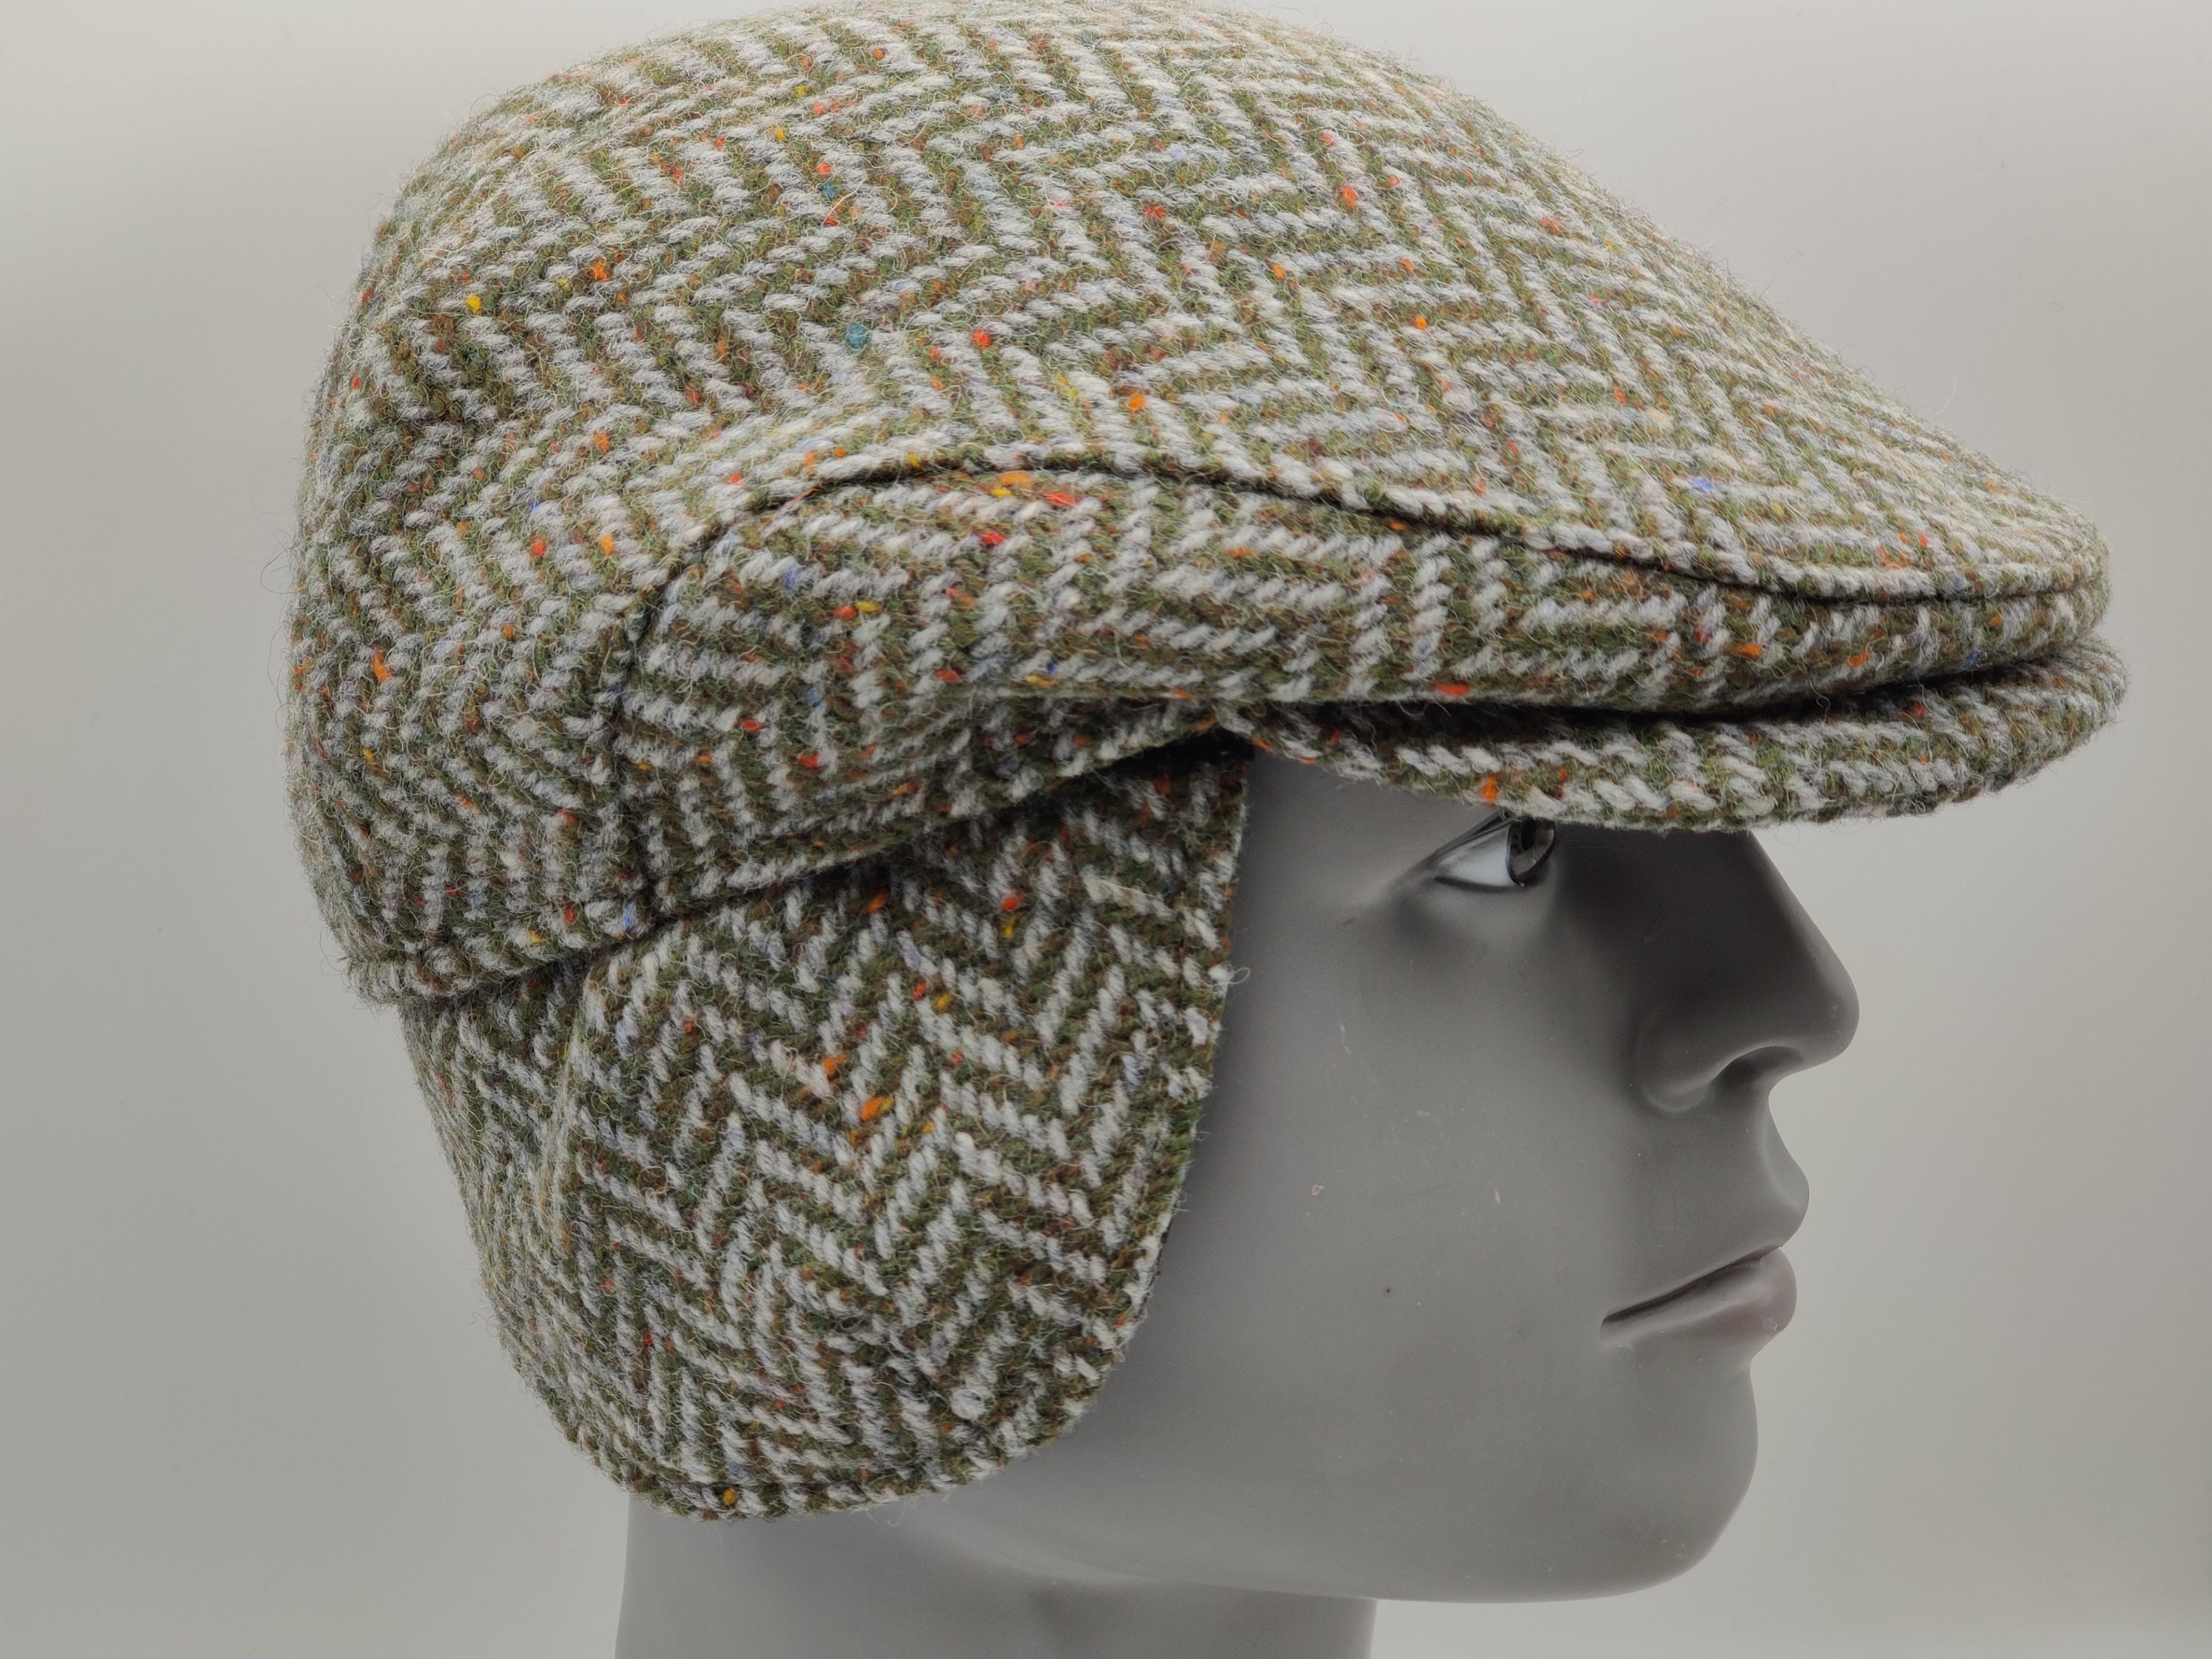 Traditional Irish Donegal Tweed Flat Cap -Speckled/Fleck Green ...